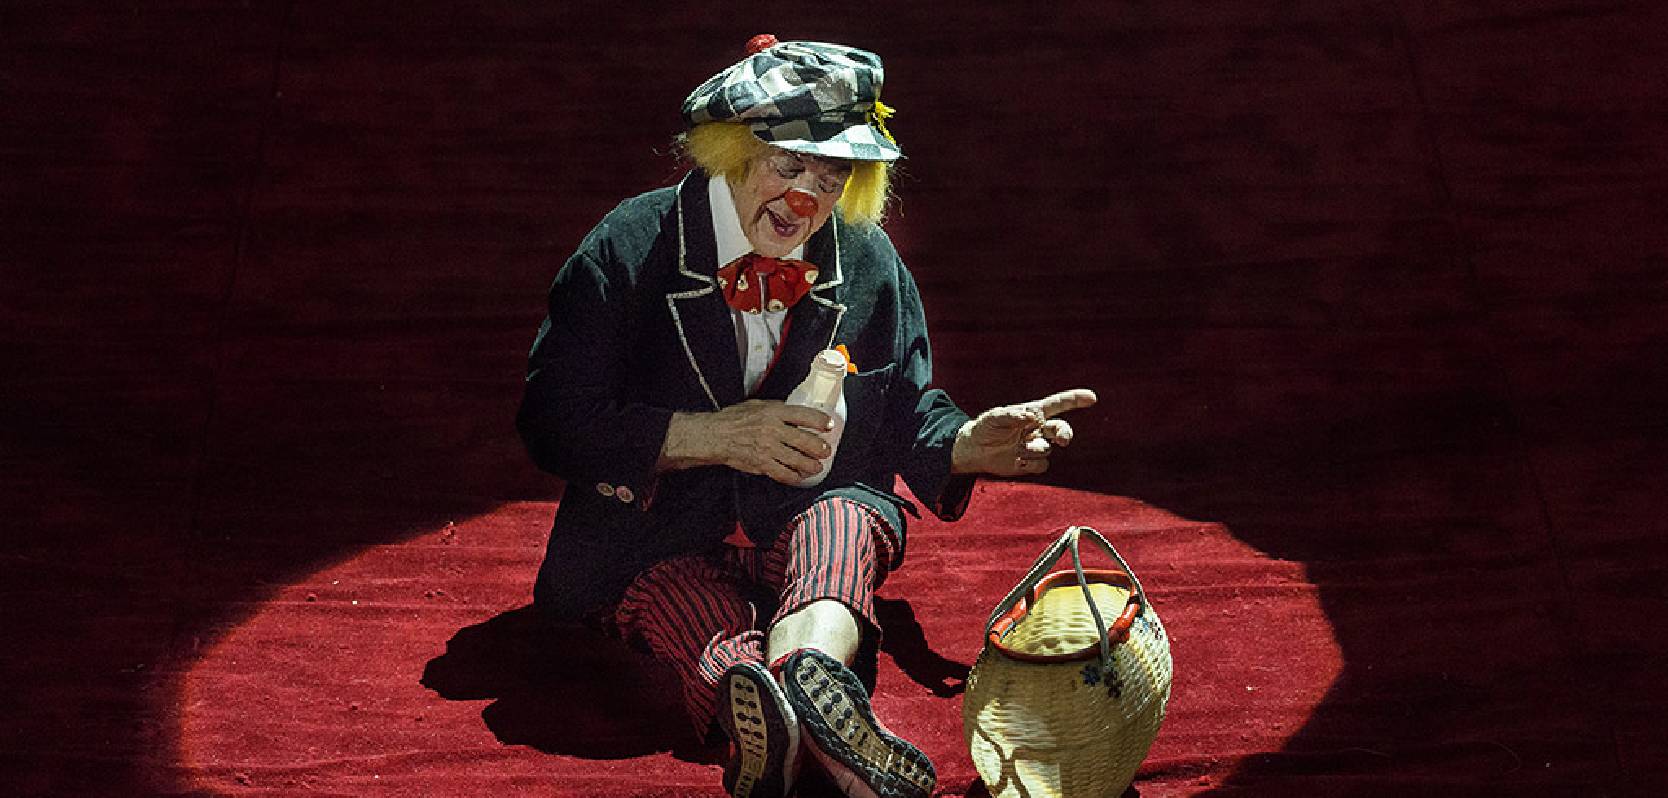 The Magical Journey of Oleg Popov the “Last Clown” in the Circus World